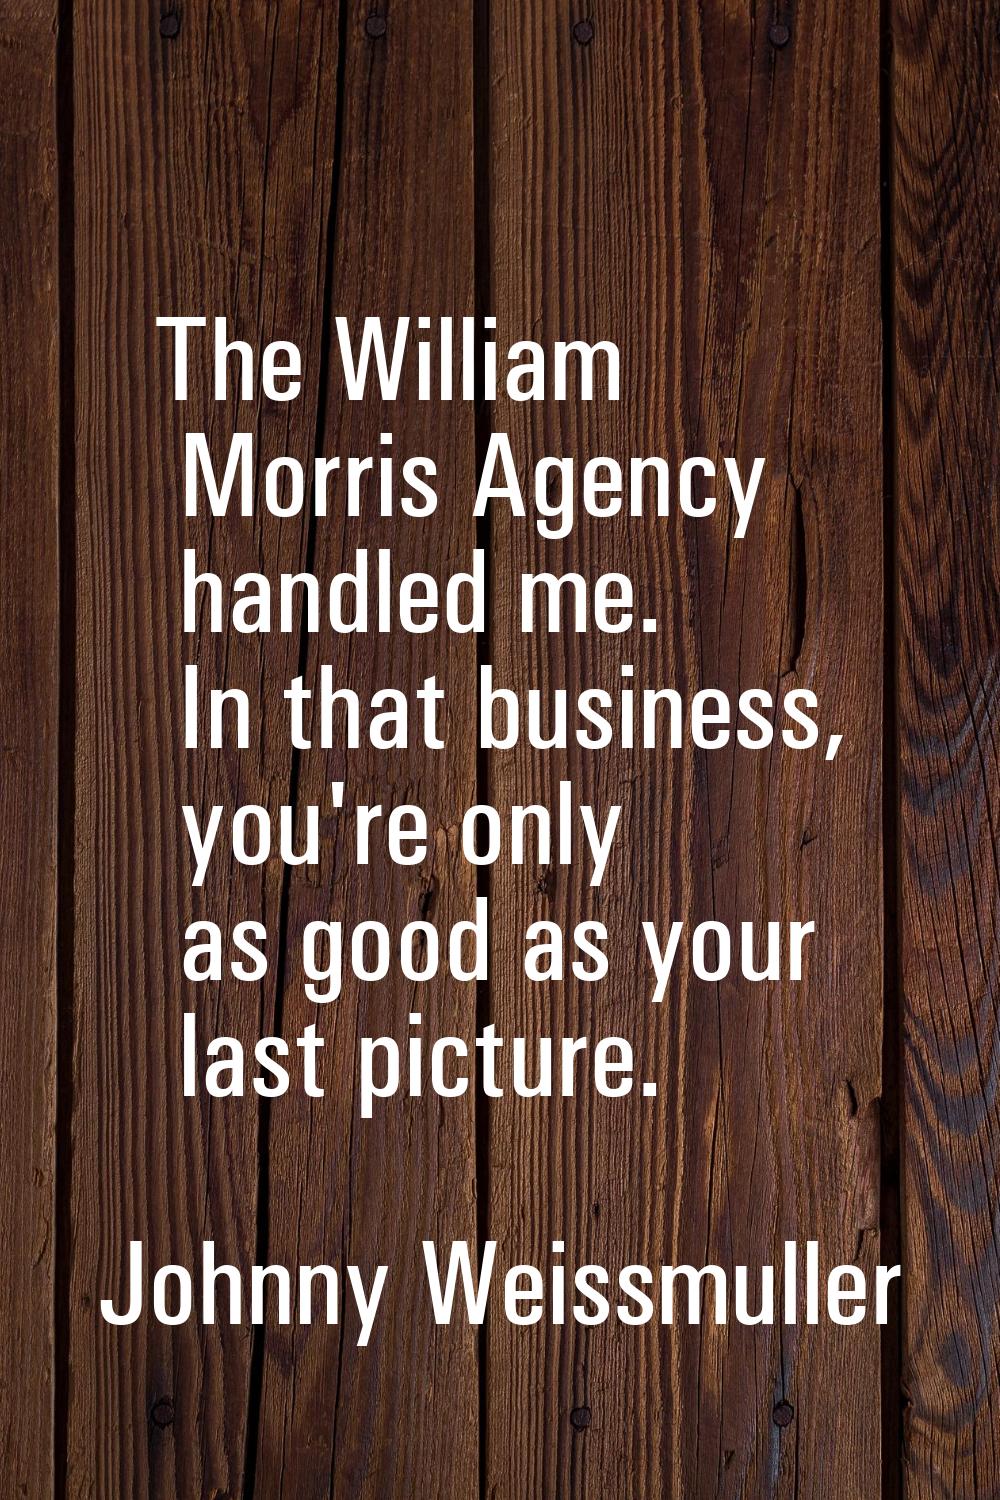 The William Morris Agency handled me. In that business, you're only as good as your last picture.